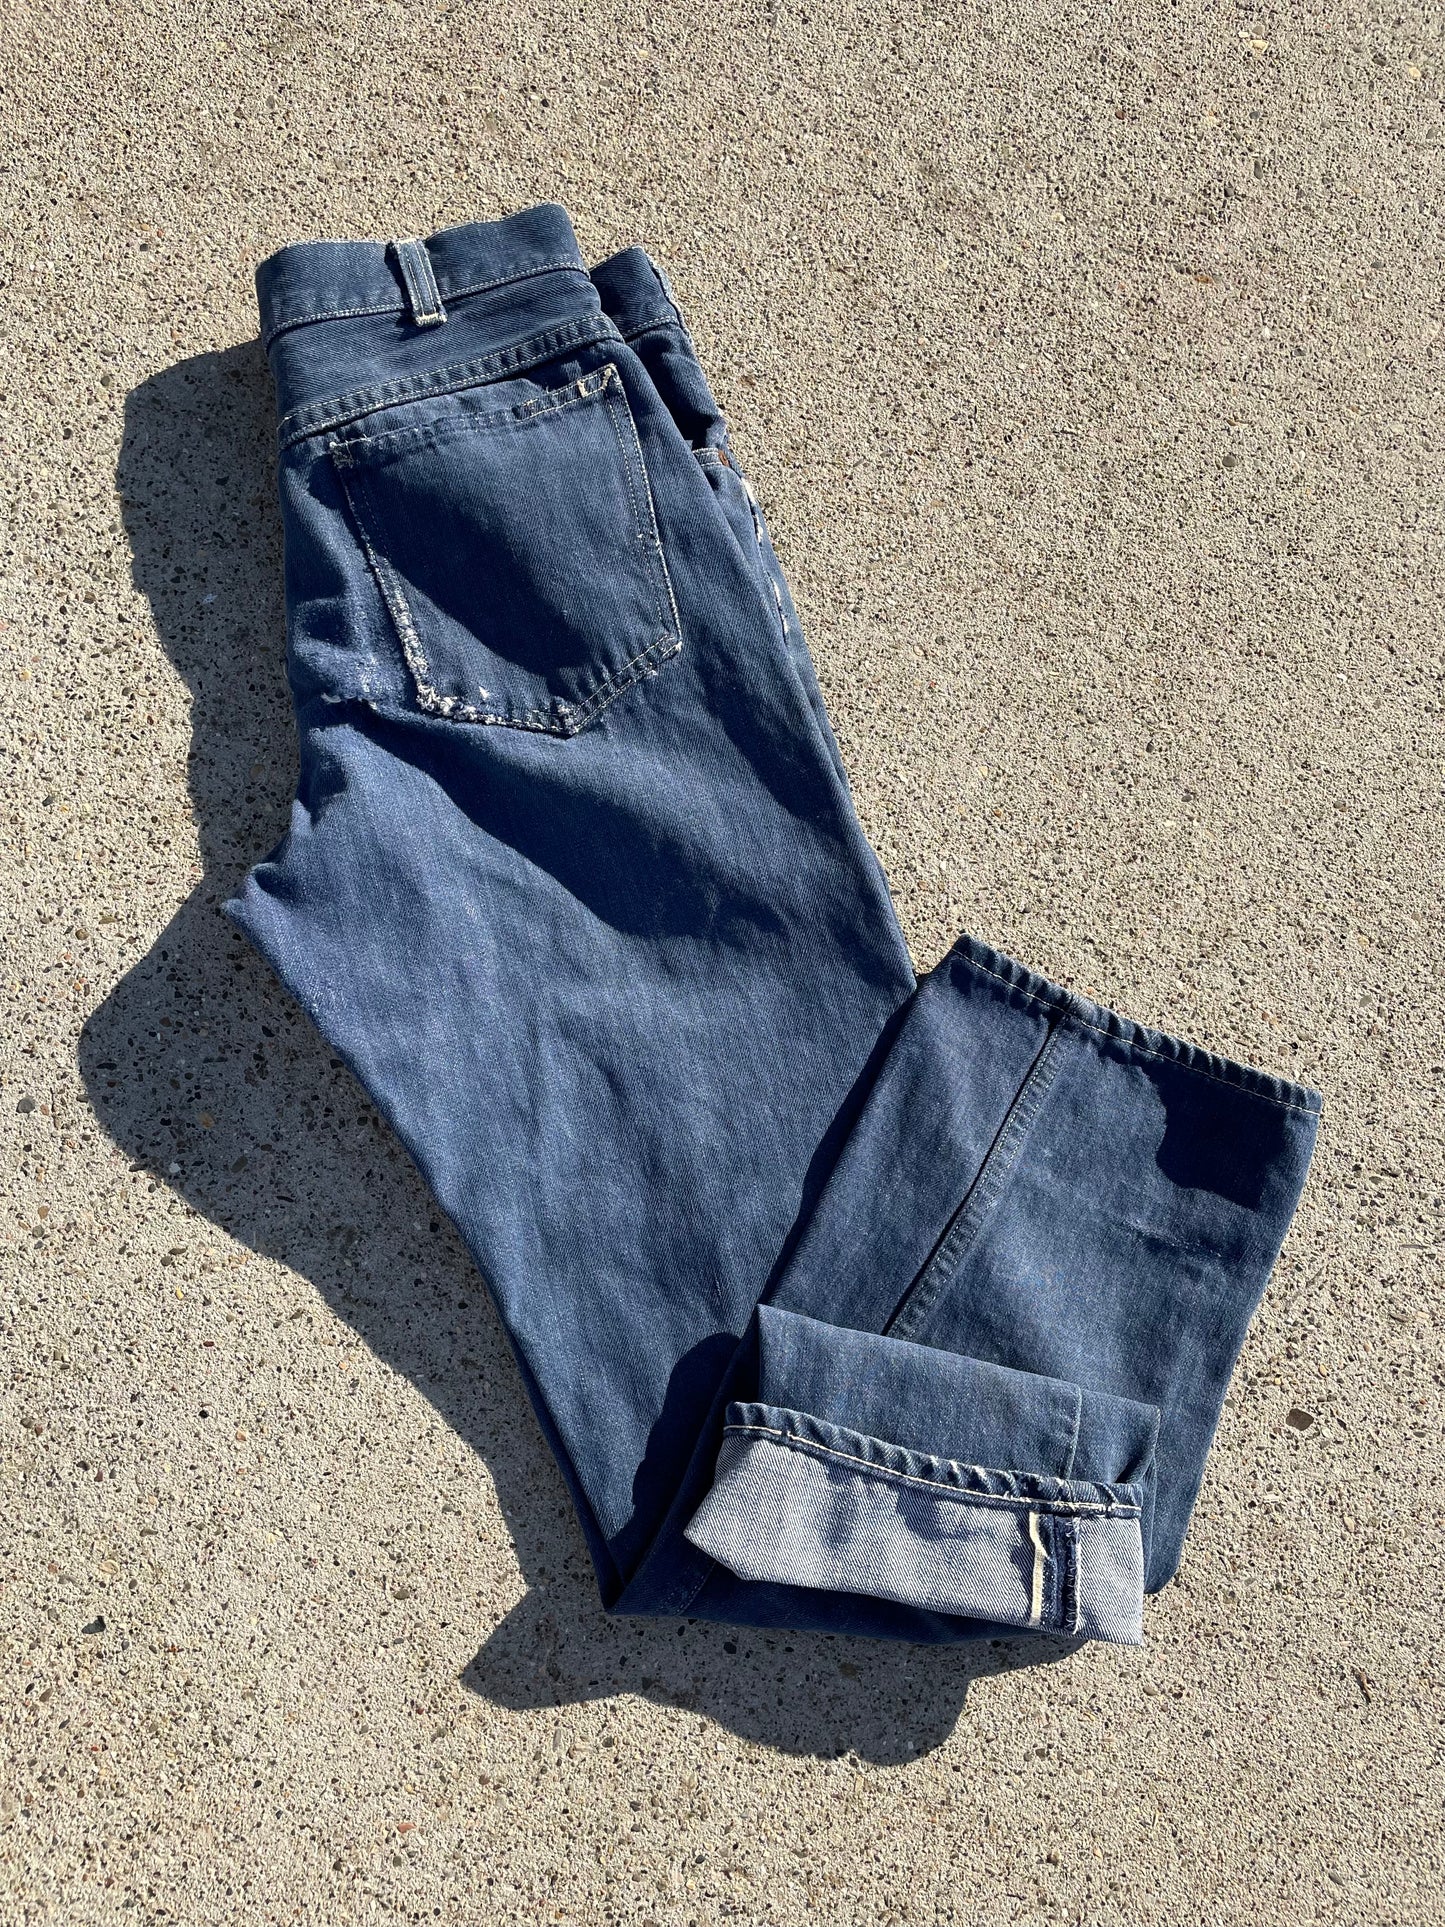 Distressed Selvedge Denim JCP Foremost Jeans